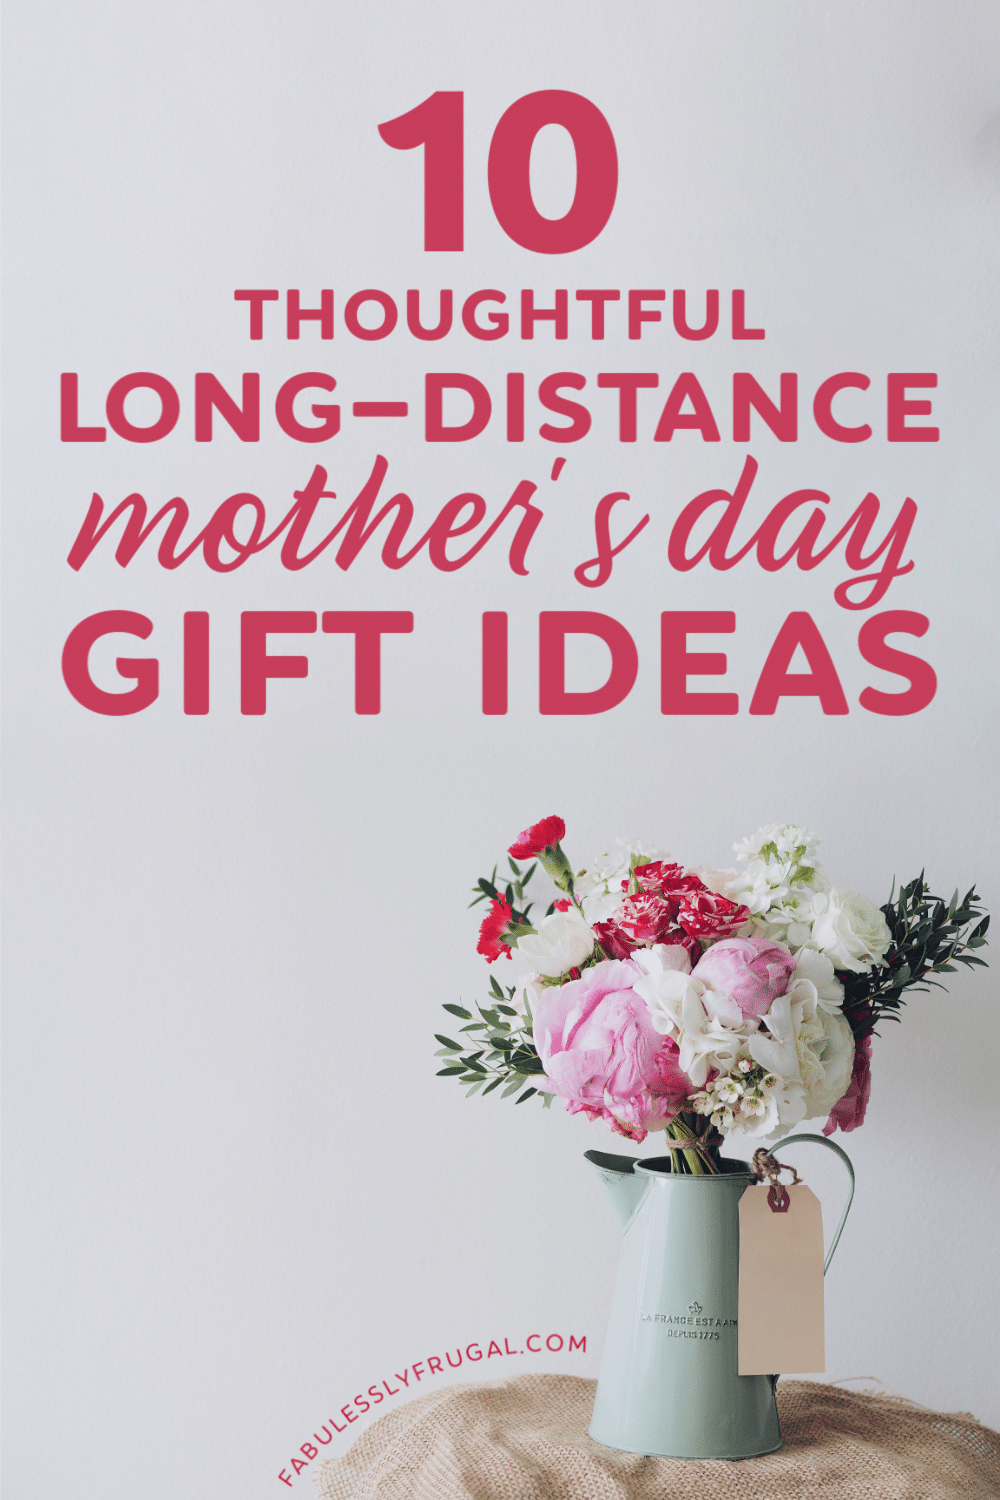 Long distance Mother's Day gifts